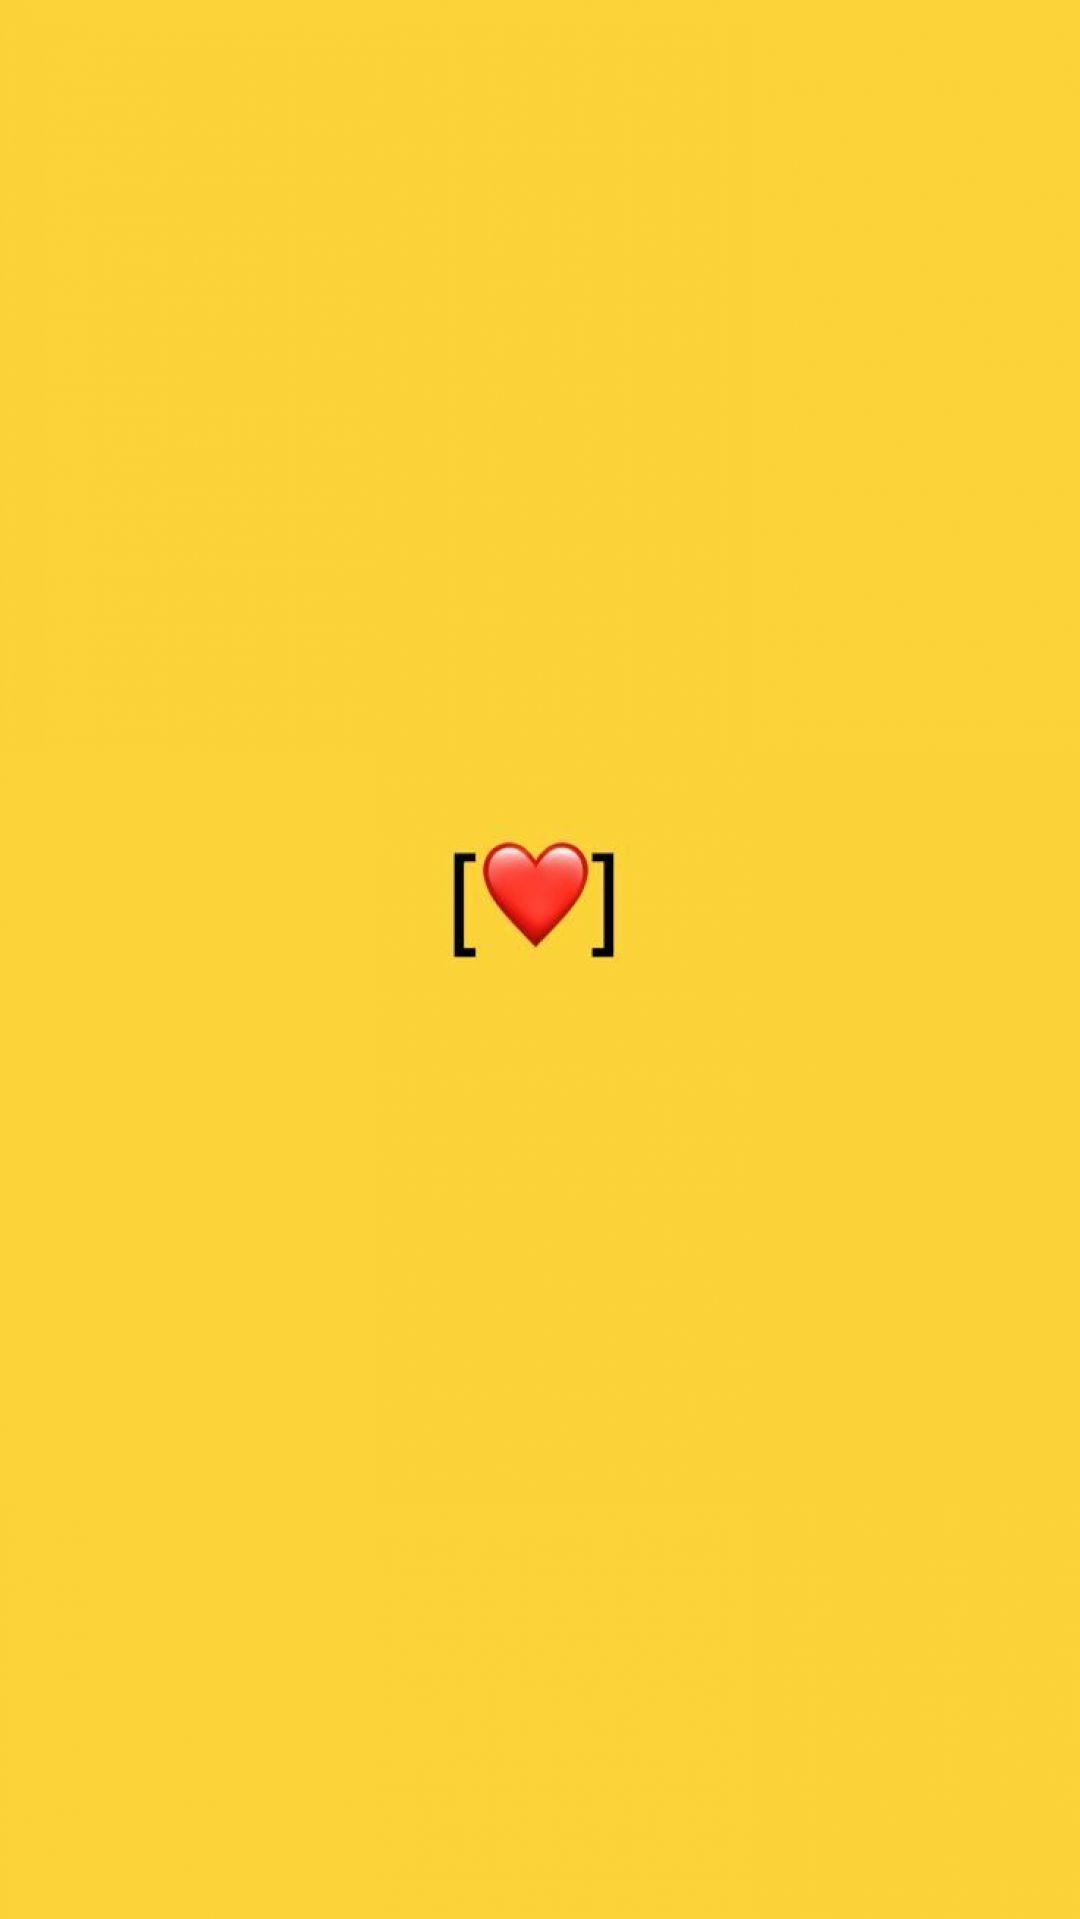 Yellow background with a heart in the middle - Emoji